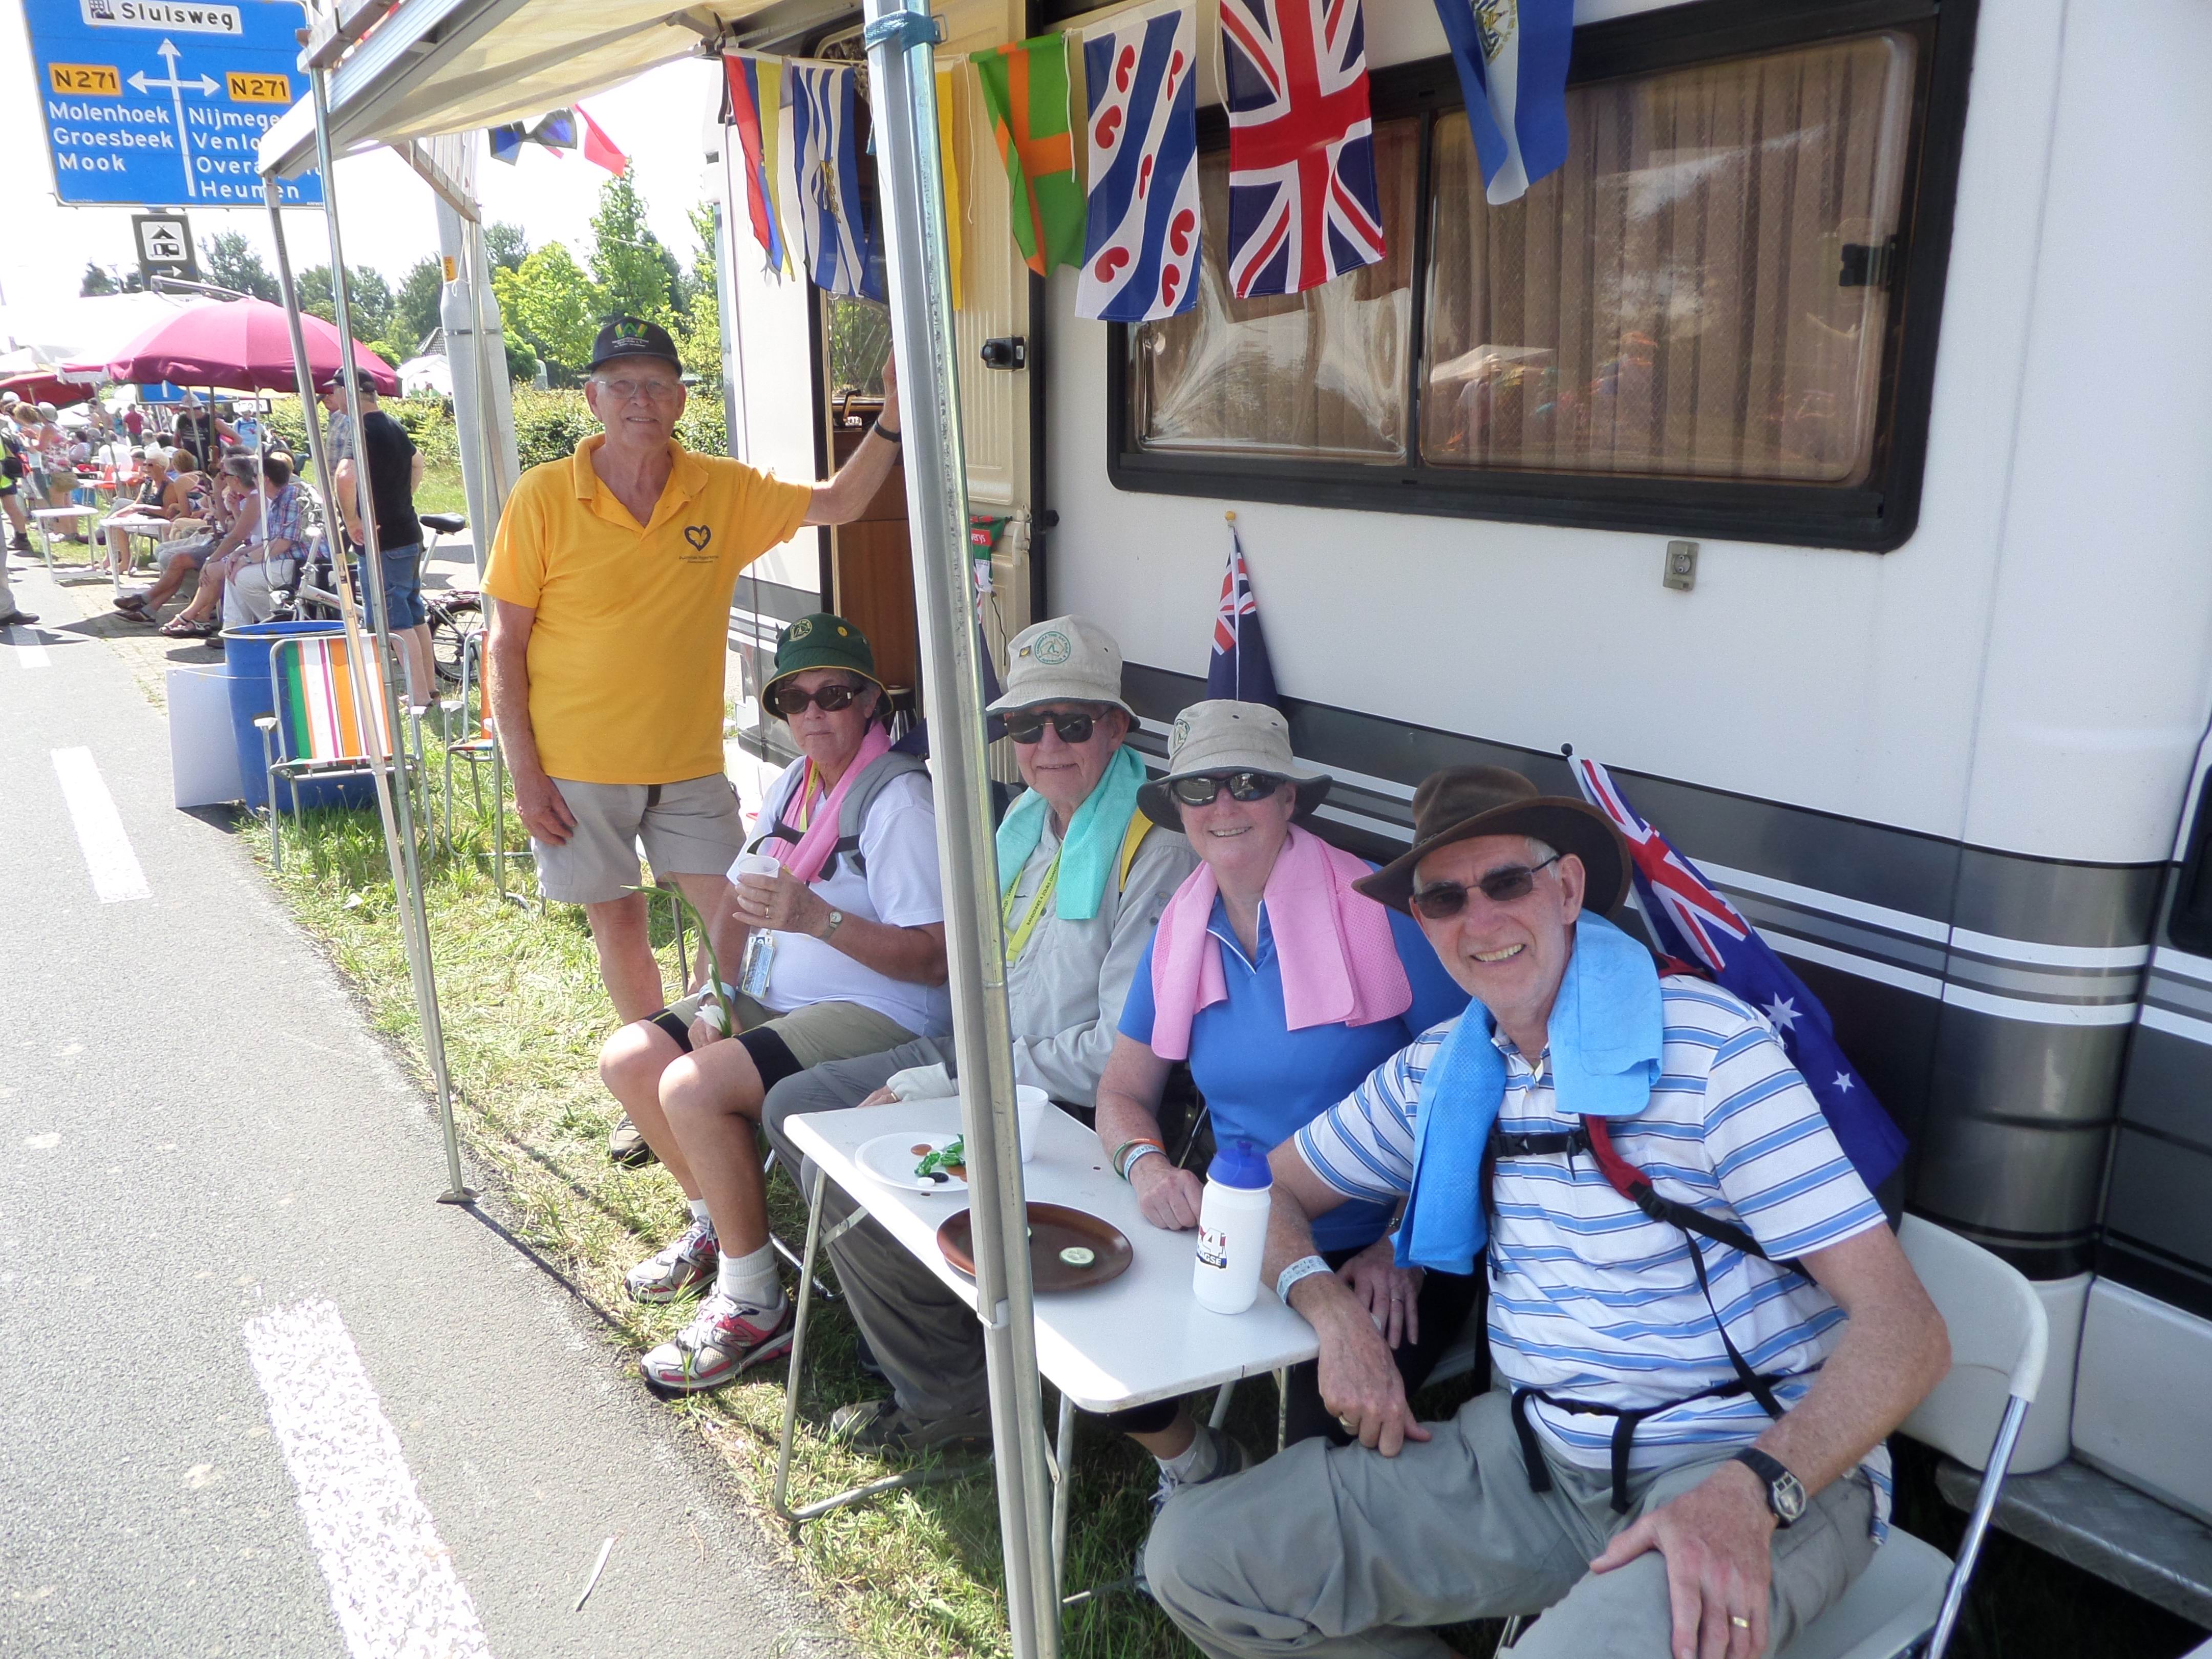 Four adult walkers seated and one man standing in front of a caravan.